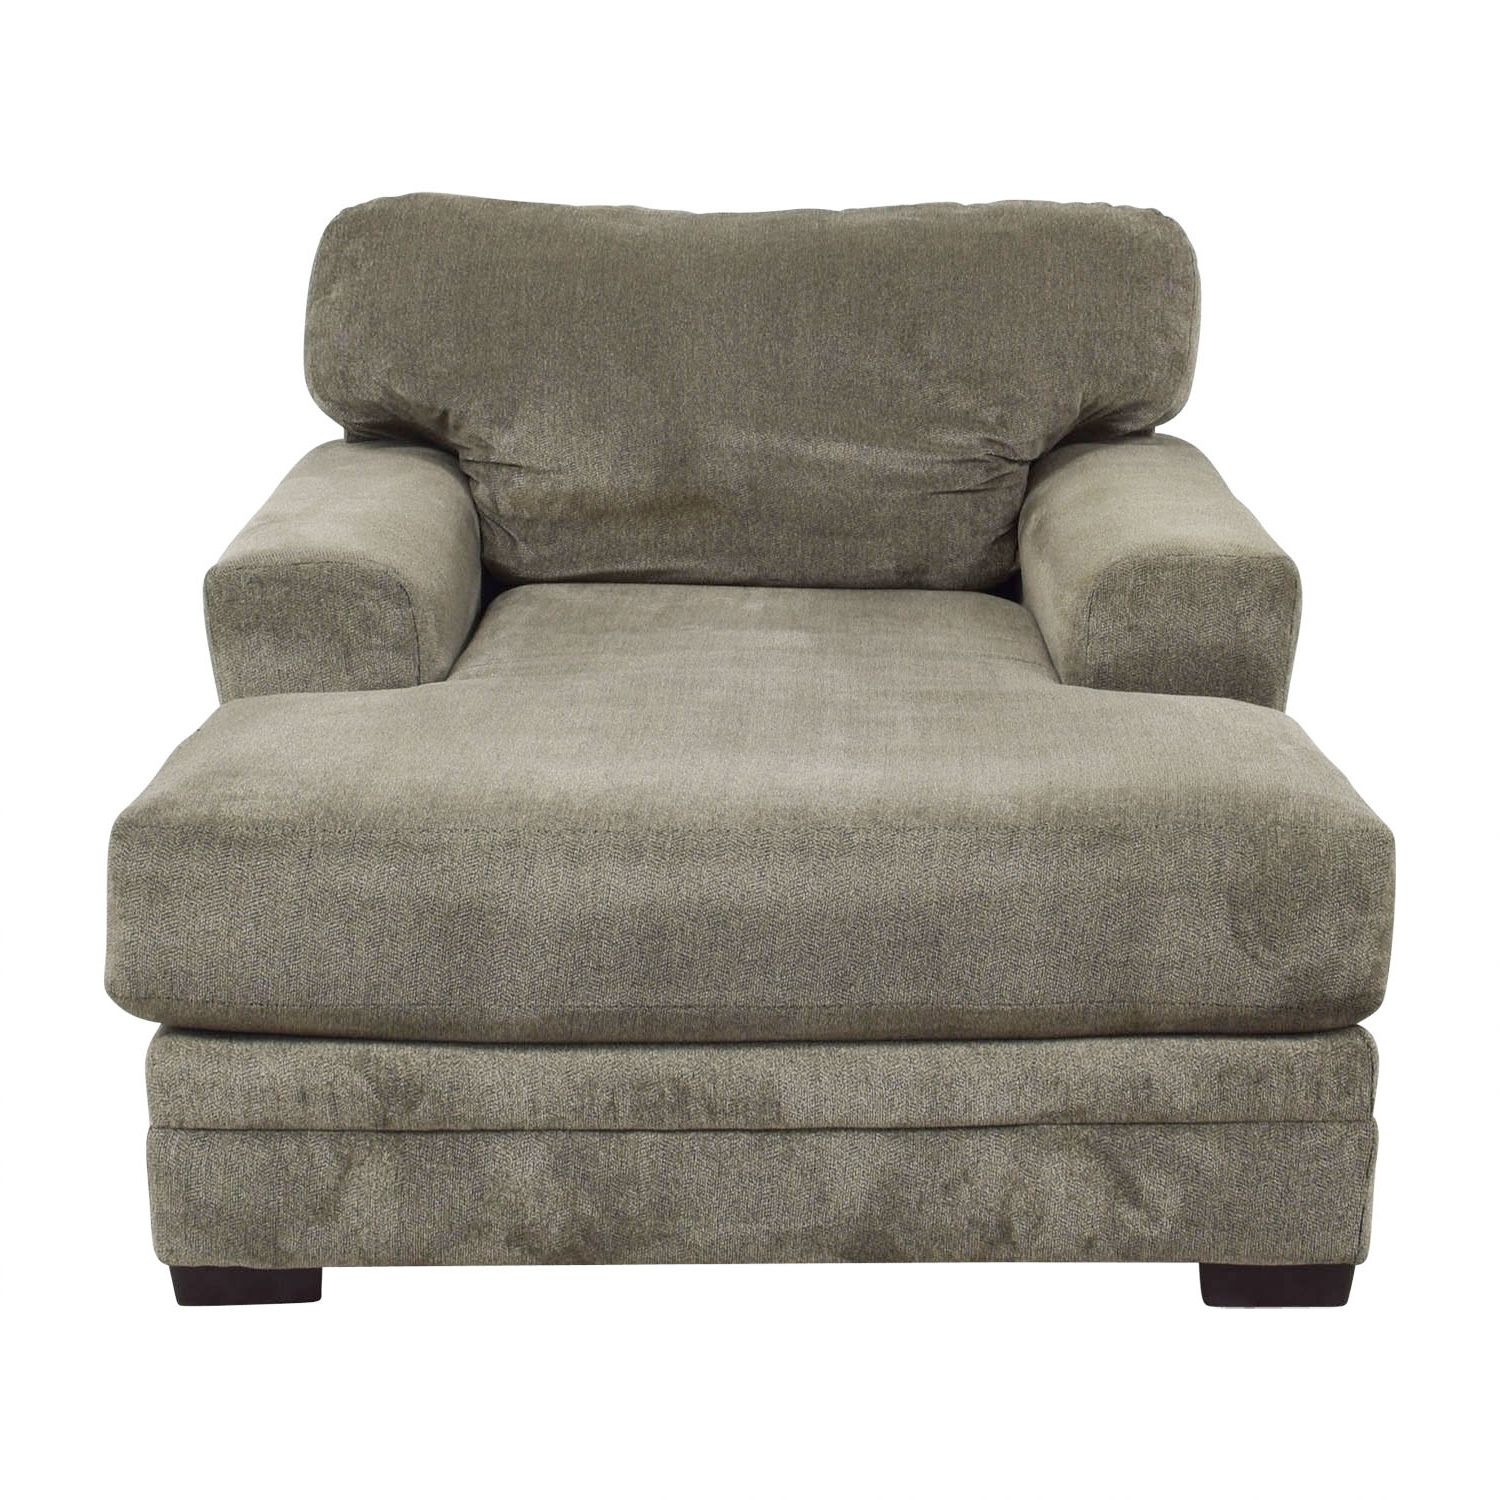 [%81% Off – Bob's Furniture Bob's Furniture Grey Chaise Lounge / Sofas Inside Fashionable Grey Chaises|grey Chaises With Regard To Current 81% Off – Bob's Furniture Bob's Furniture Grey Chaise Lounge / Sofas|most Recently Released Grey Chaises Regarding 81% Off – Bob's Furniture Bob's Furniture Grey Chaise Lounge / Sofas|famous 81% Off – Bob's Furniture Bob's Furniture Grey Chaise Lounge / Sofas With Grey Chaises%] (Photo 4 of 15)